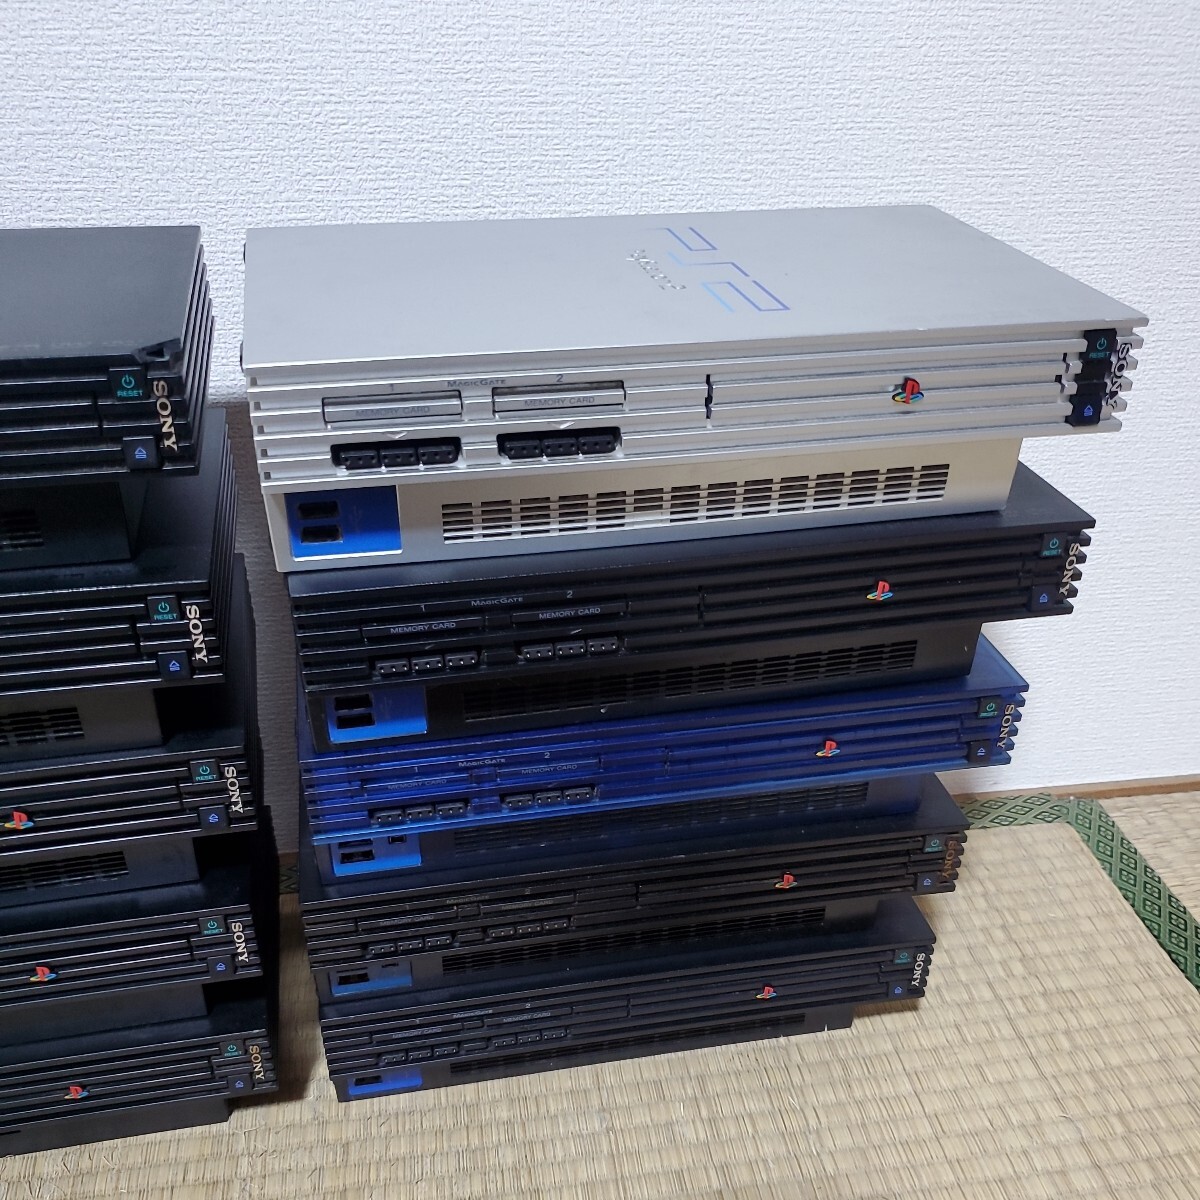 PS2 本体 10台 まとめ売り SCPH-50000 SCPH-39000 SCPH-37000 SCPH-30000 SCPH-15000 SONY プレステ2 プレイステーション2 PlayStation_画像3